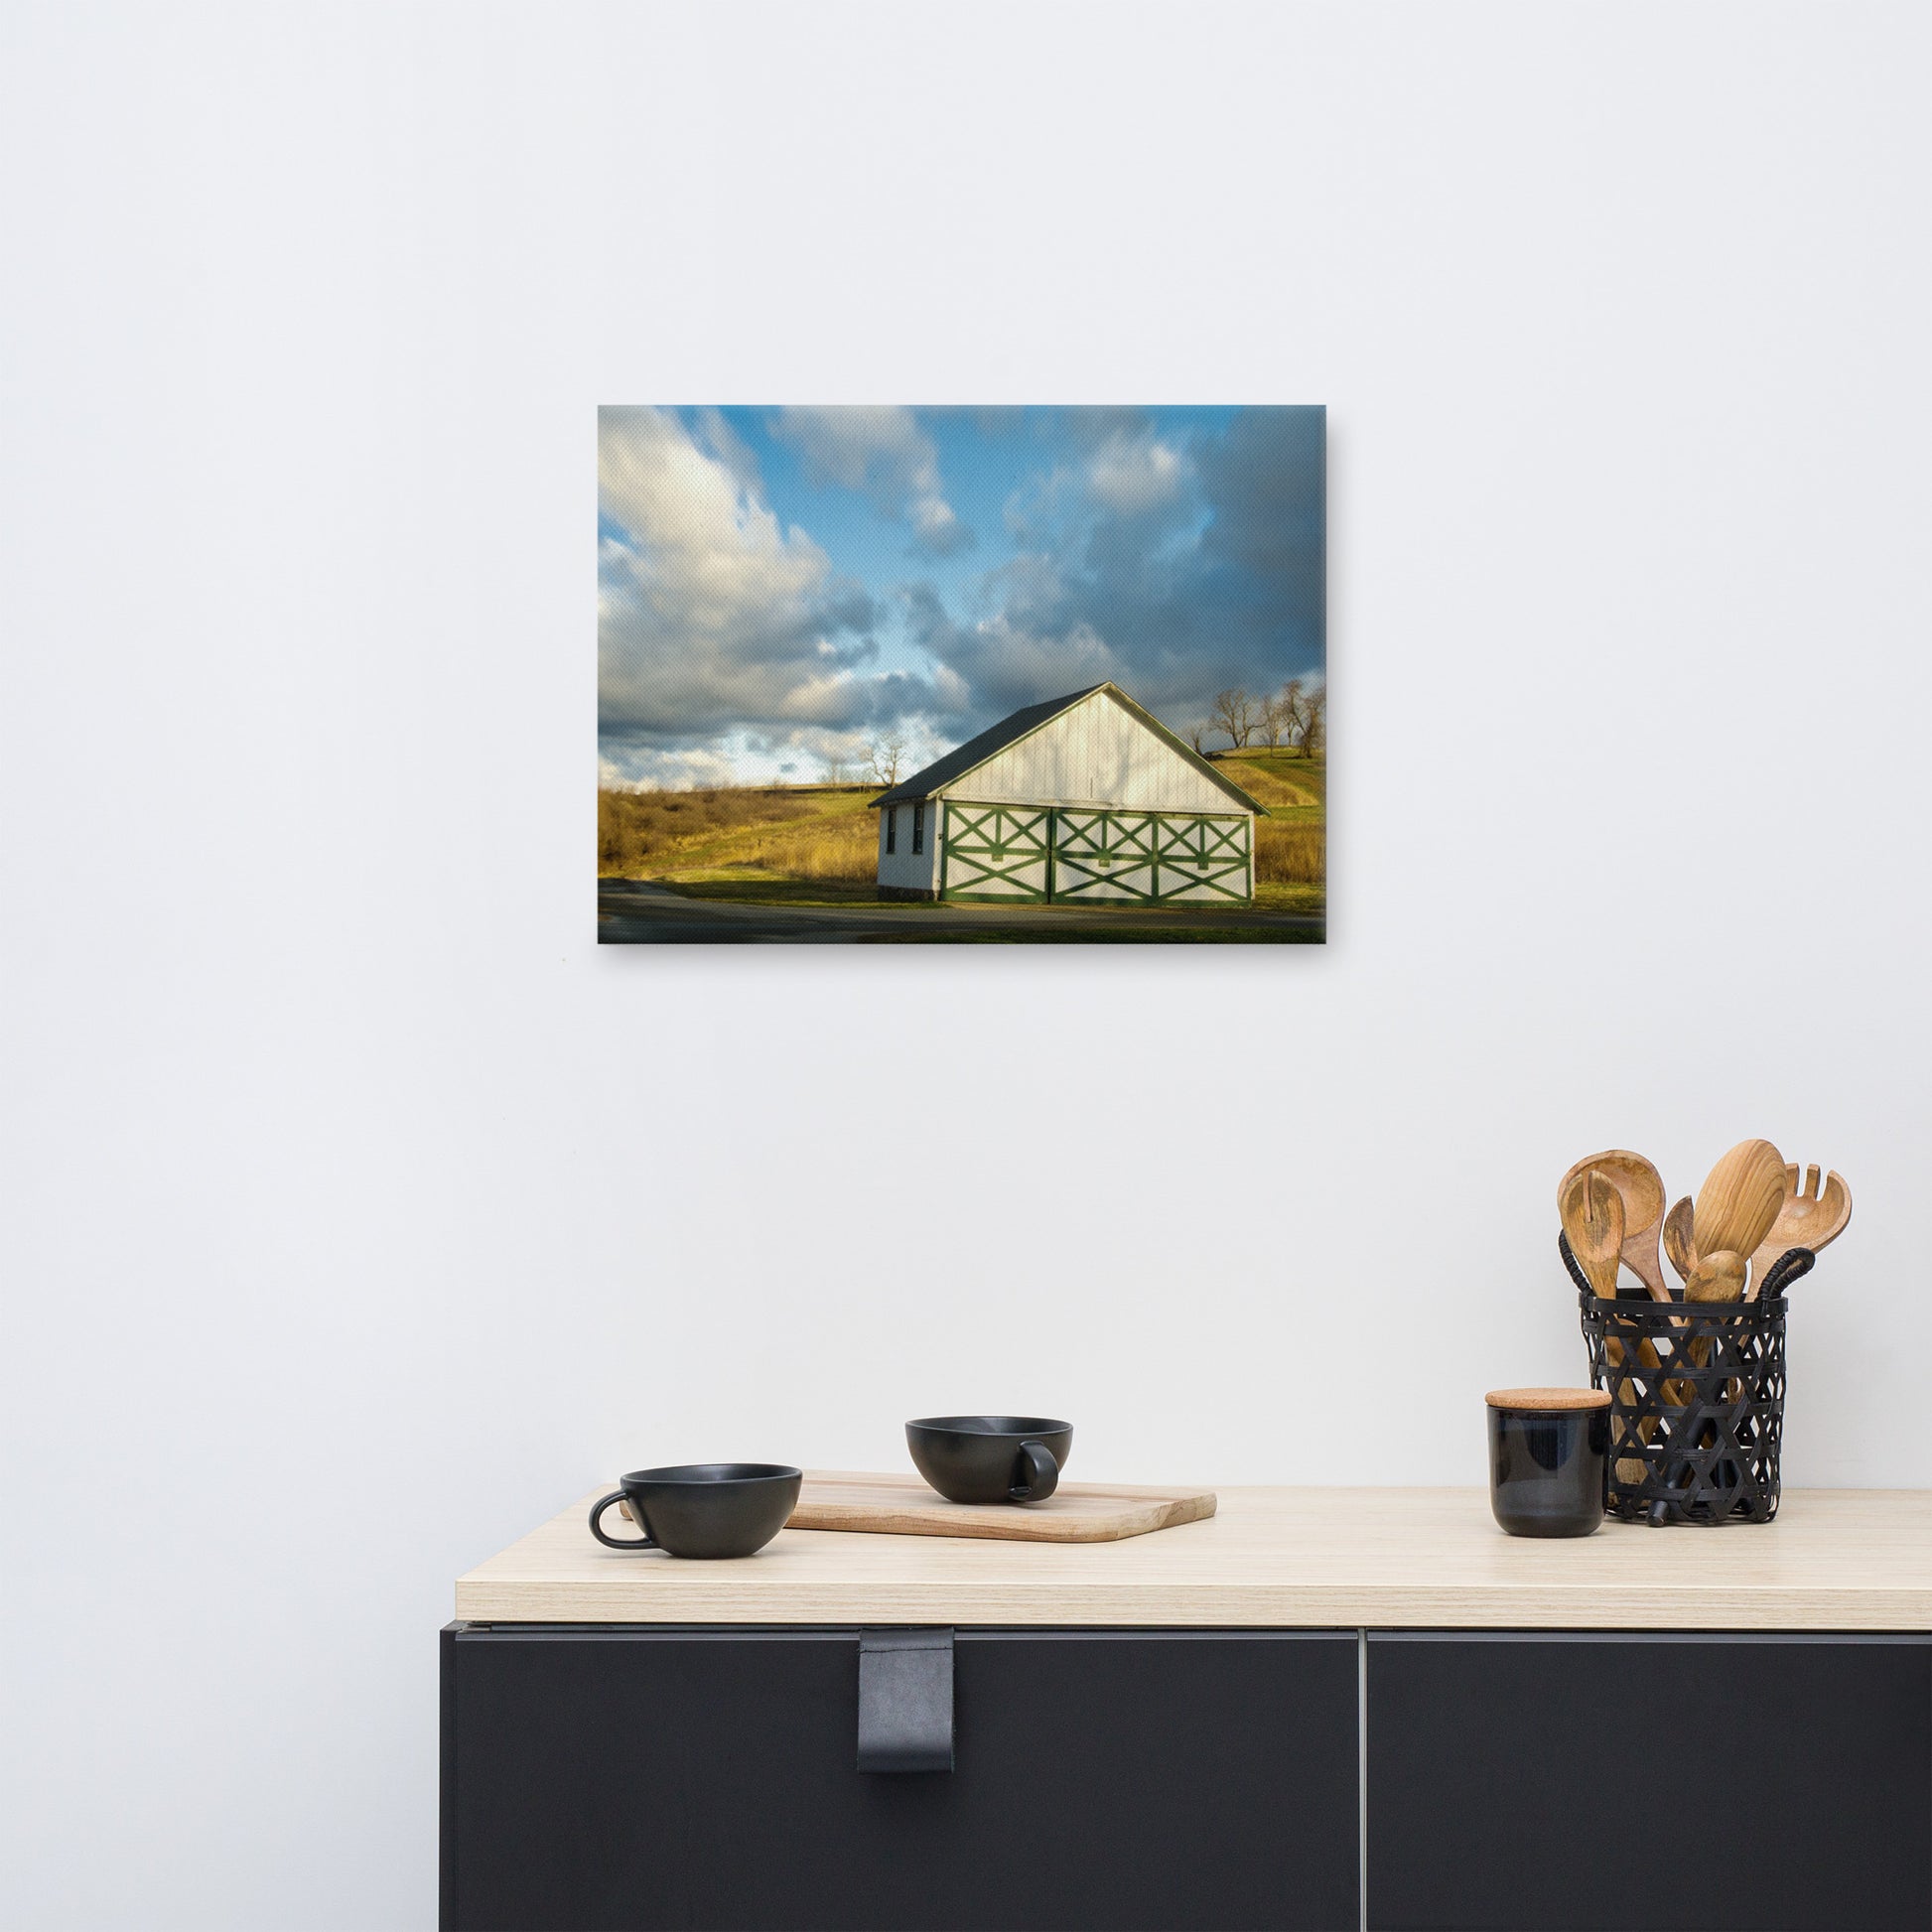 Dining Wall Pictures: Aging Barn in the Morning Sun Traditional Color - Rural / Country Style Landscape / Nature Photograph Canvas Wall Art Print - Artwork - Wall Decor